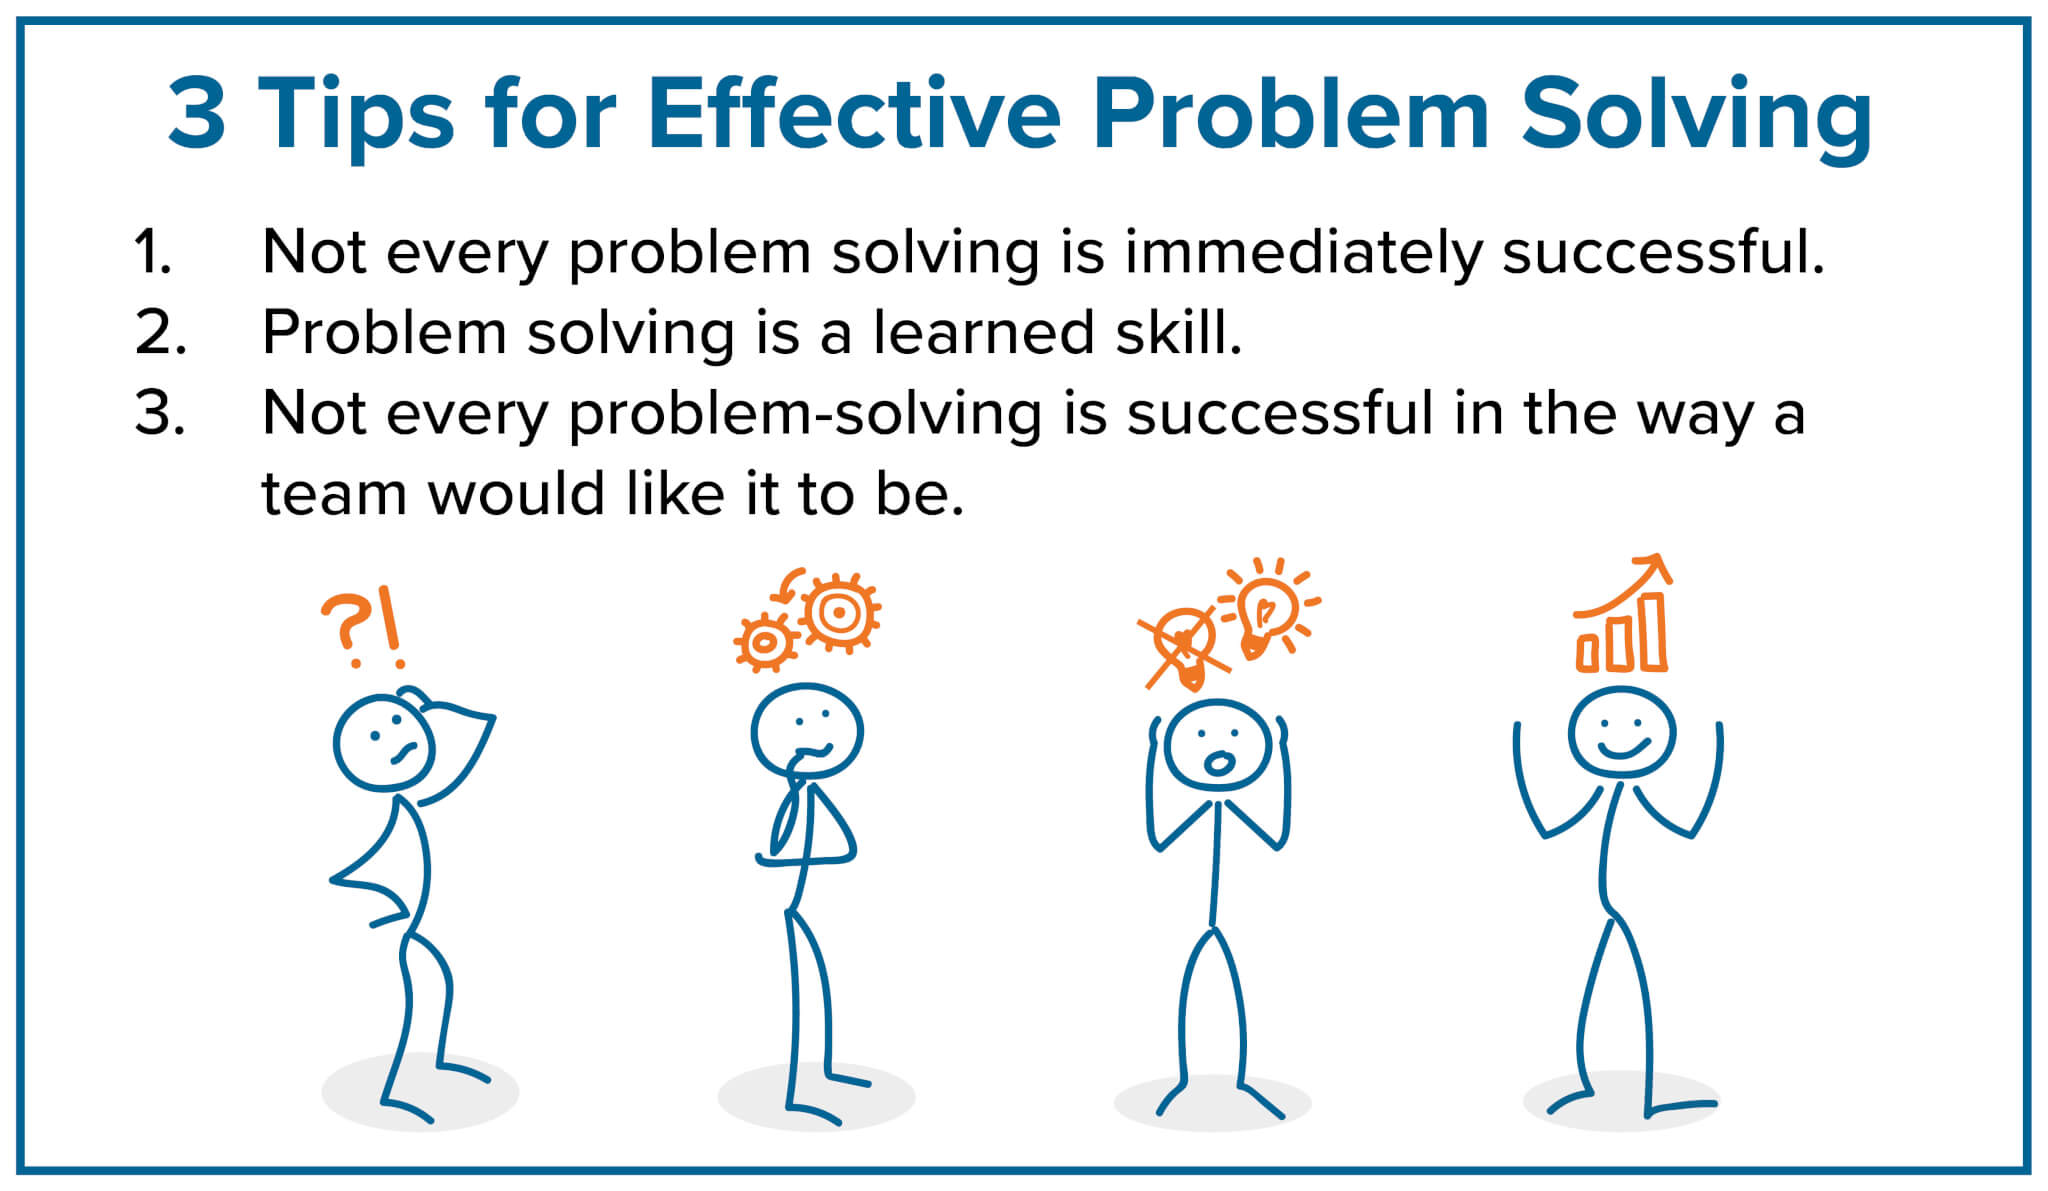 an obstacle to effective problem solving